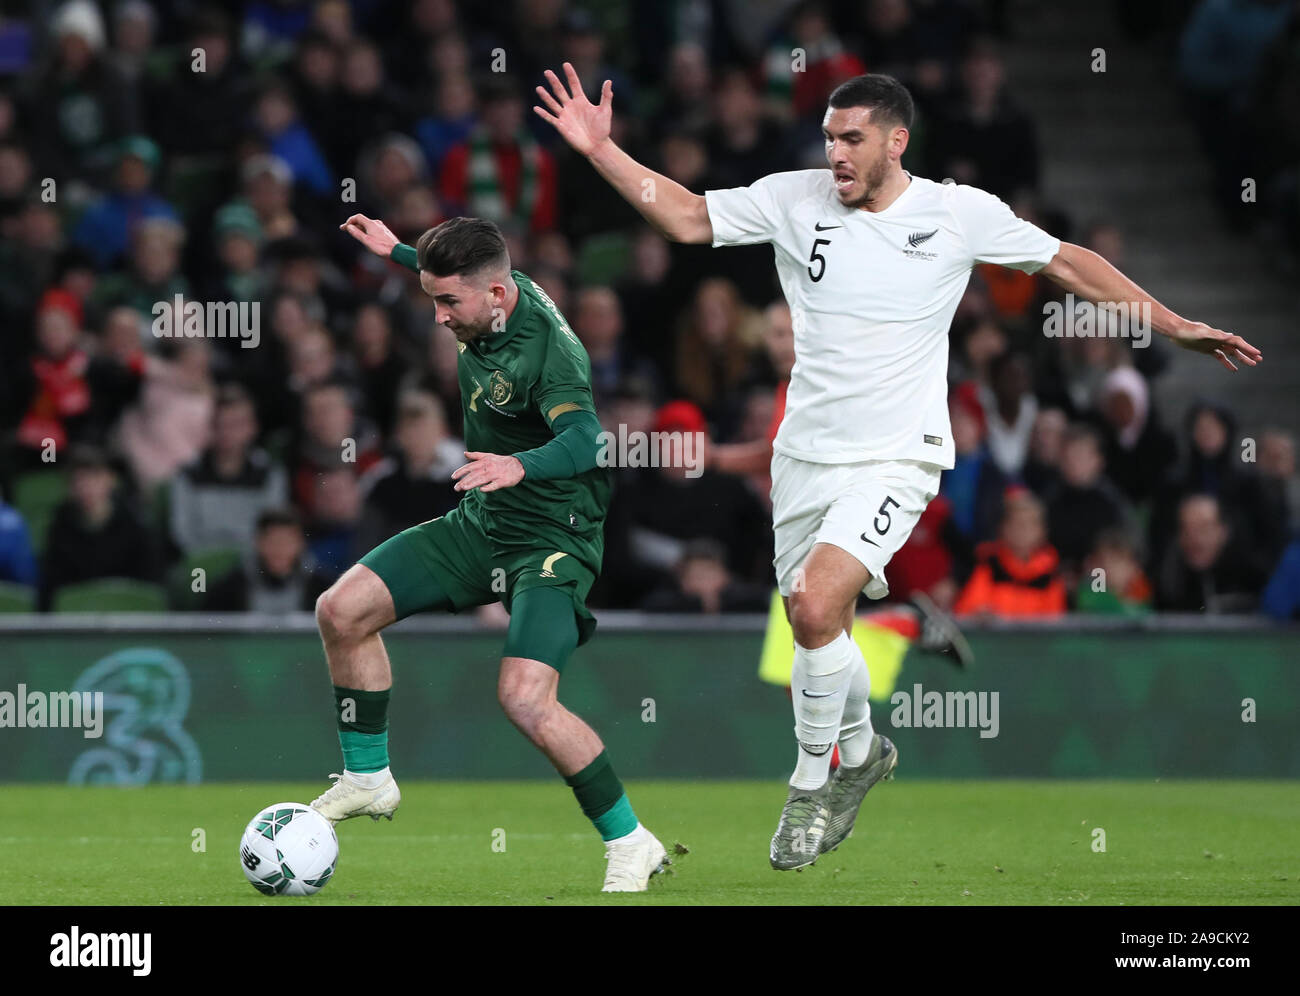 Republic of Ireland's Sean Maguire (left) and New Zealand's Michael Boxall battle for the ball during the International Friendly at the Aviva Stadium, Dublin. Stock Photo